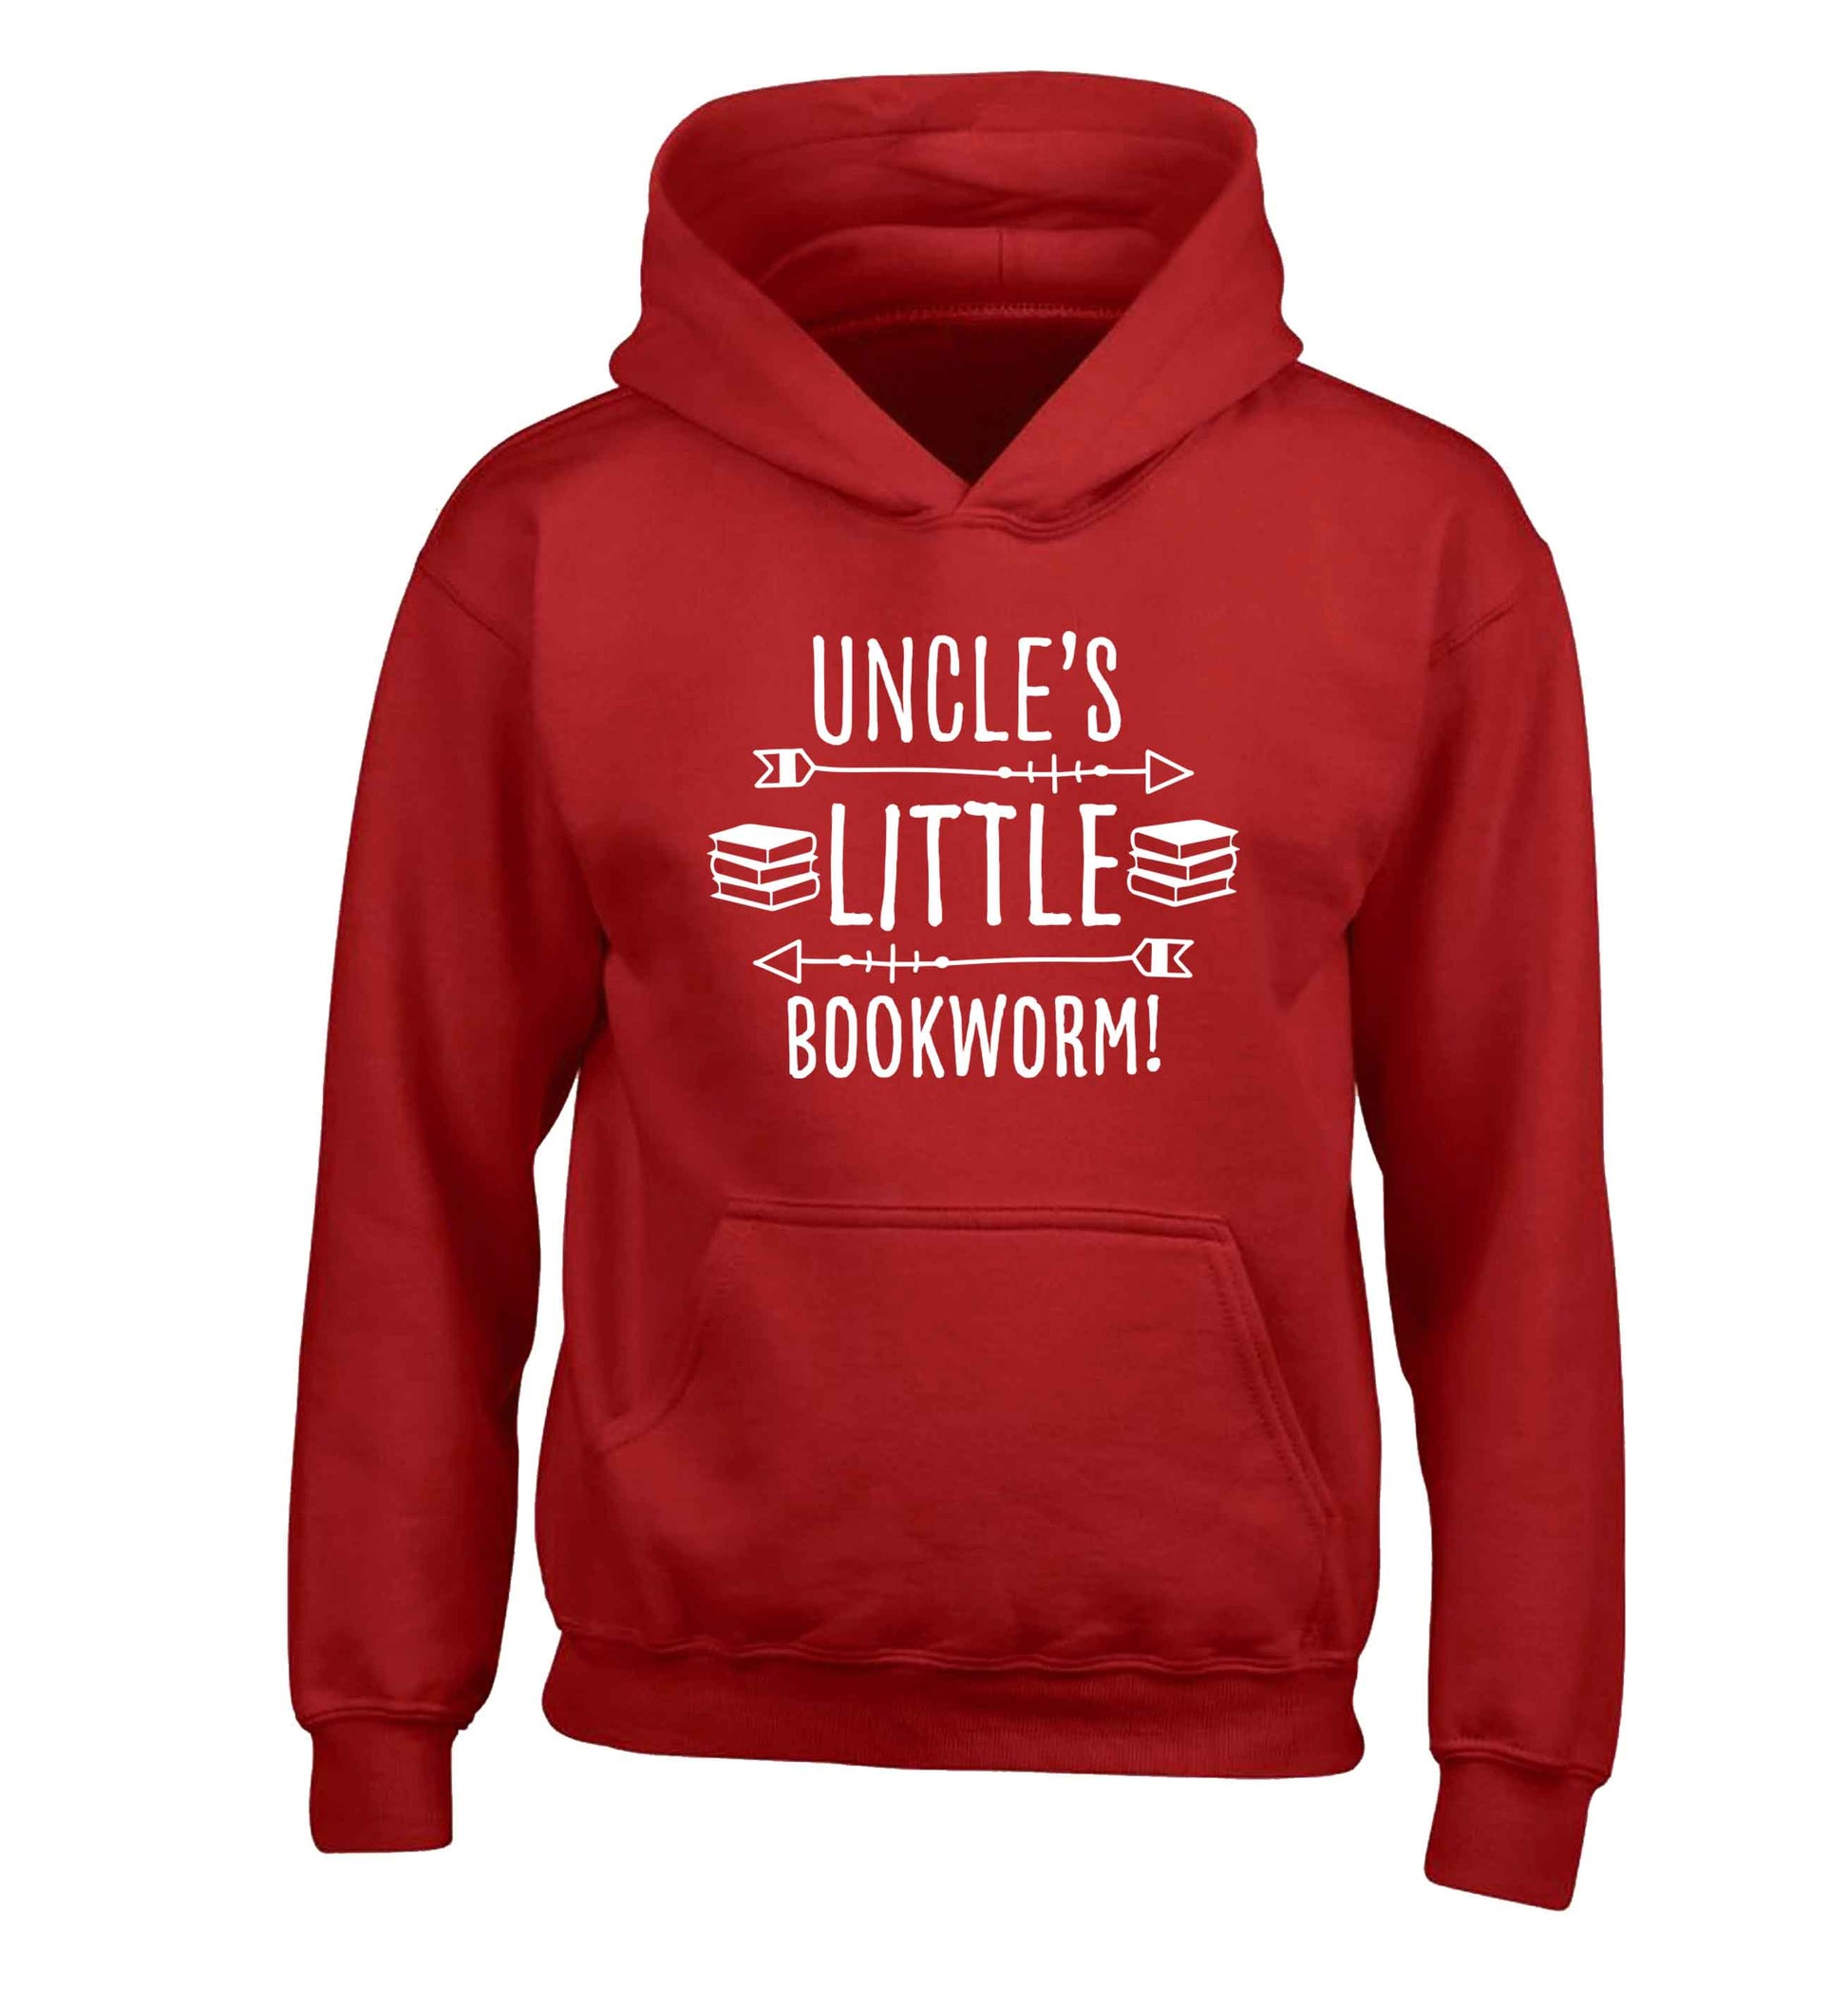 Uncle's little bookworm children's red hoodie 12-13 Years